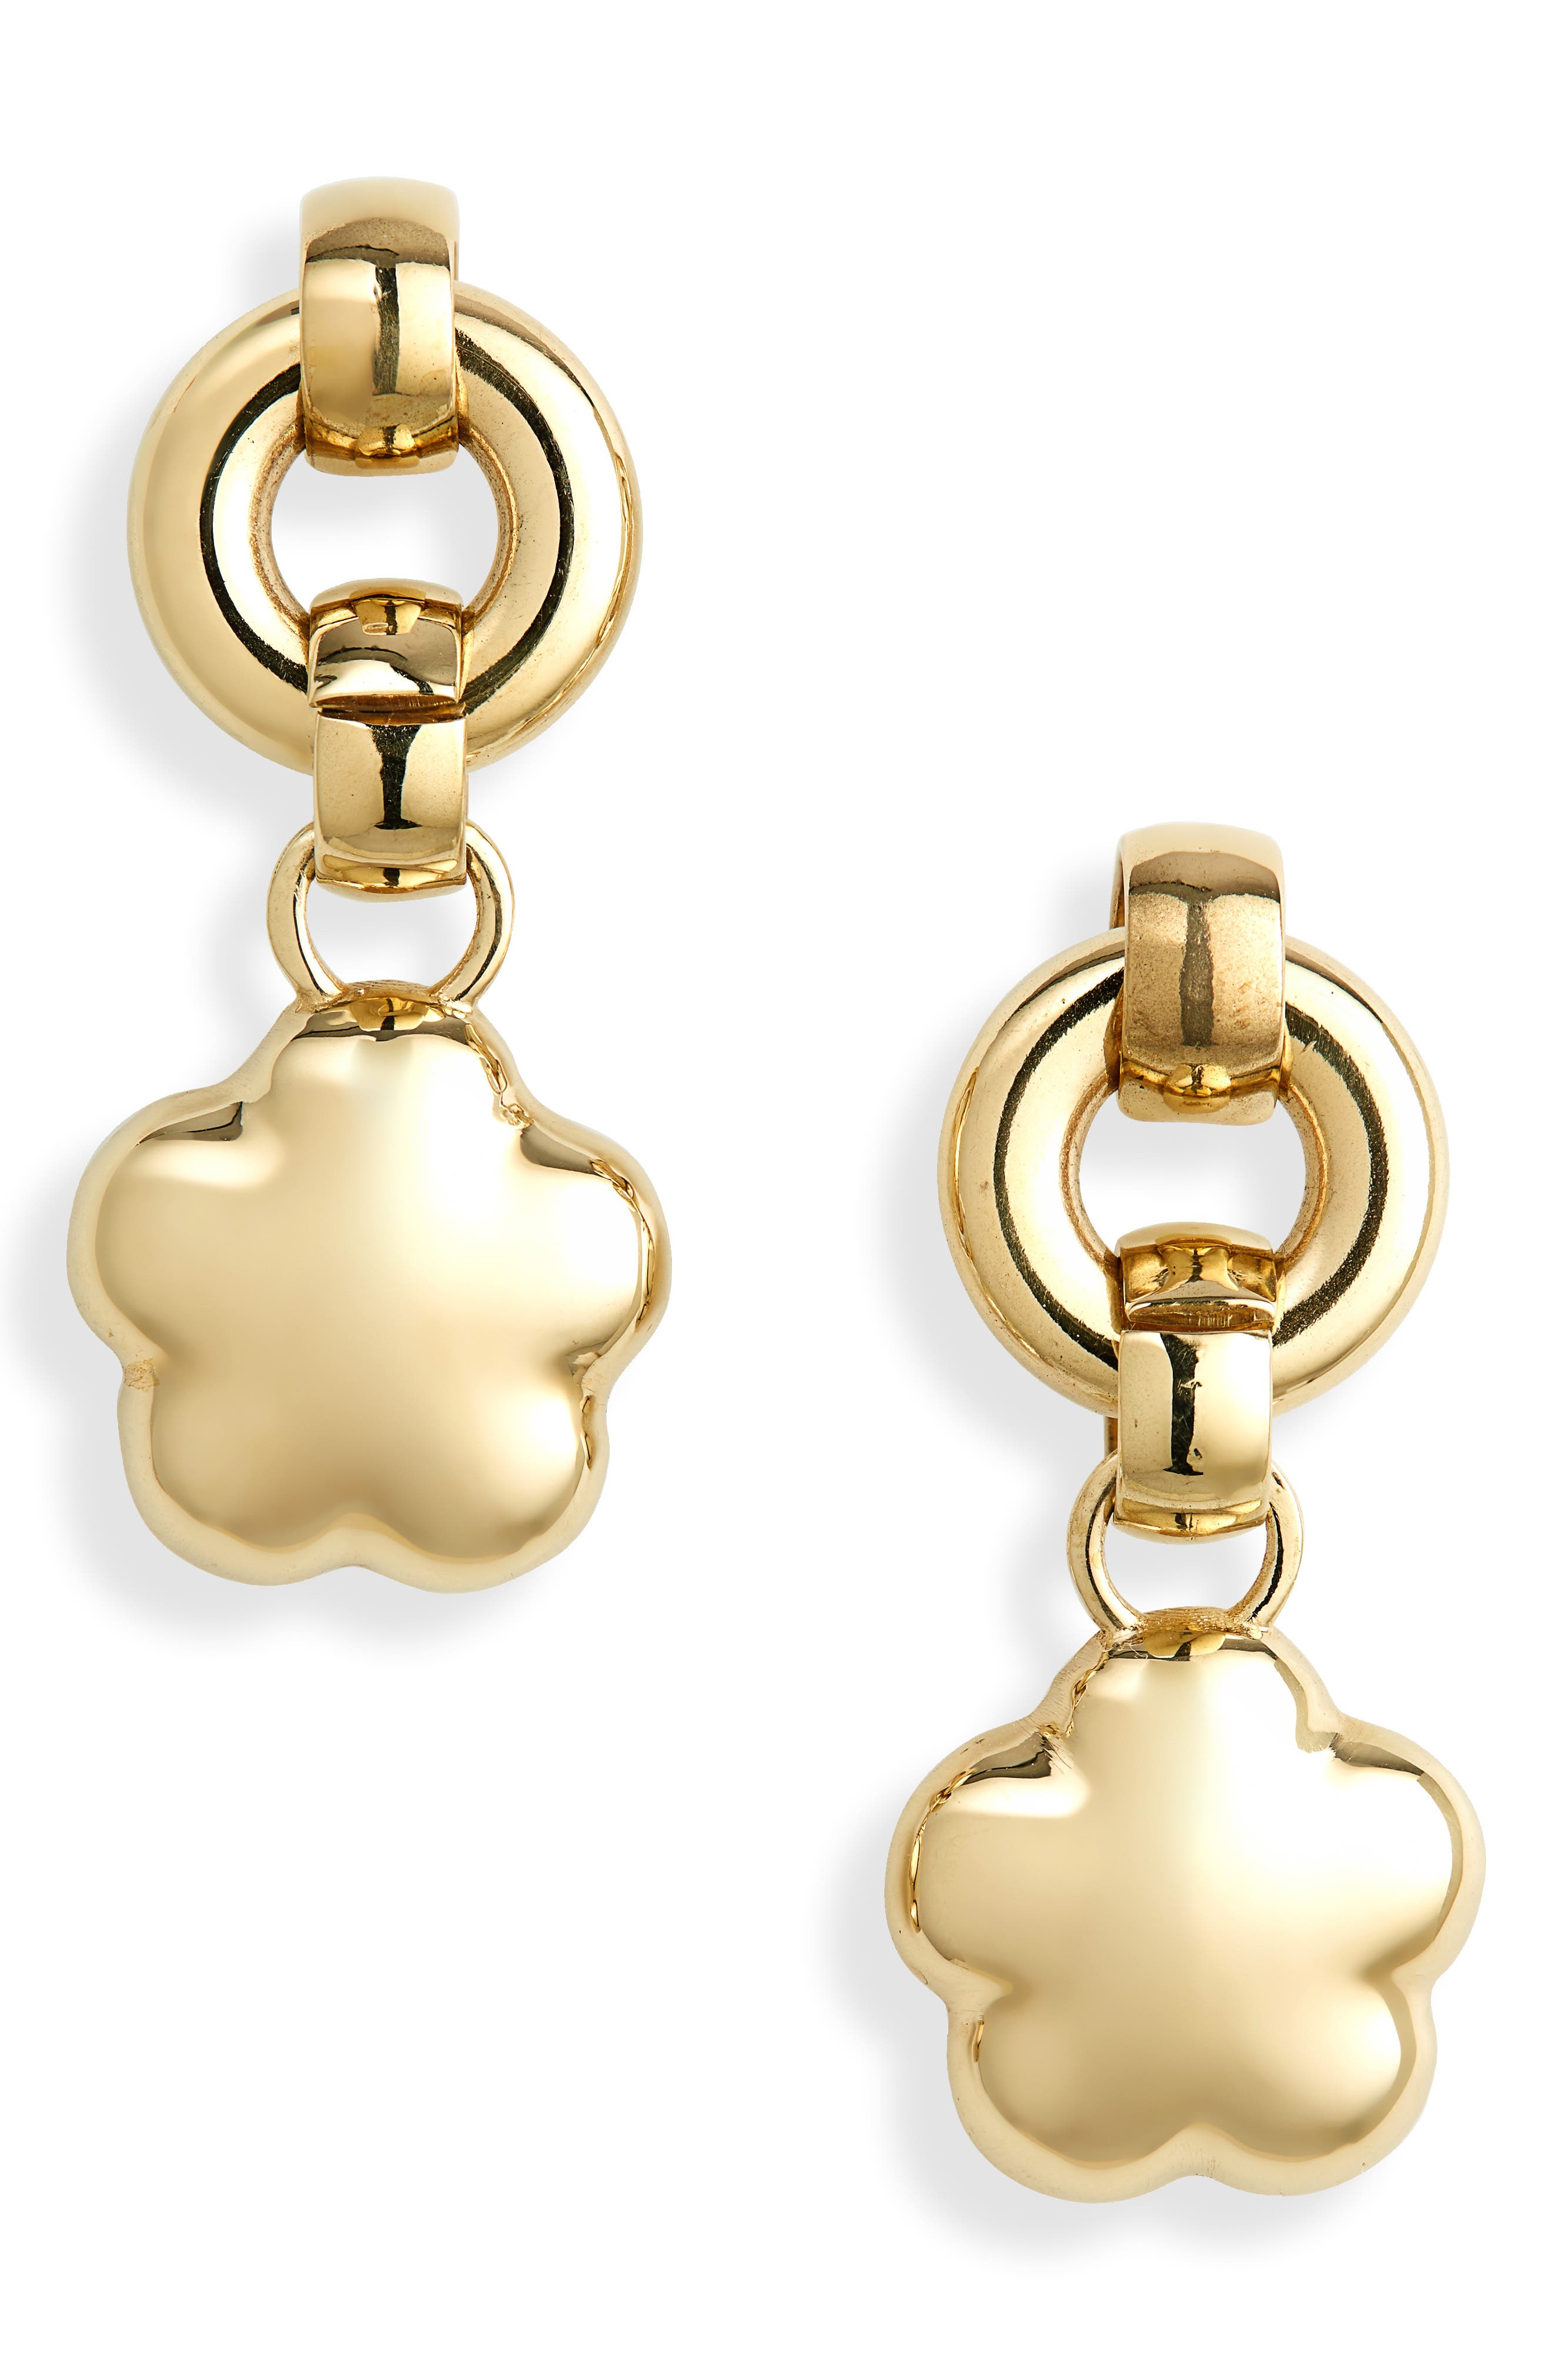 Laura Lombardi Fiorella Drop Earrings in 14Kt Gold Plated at Nordstrom